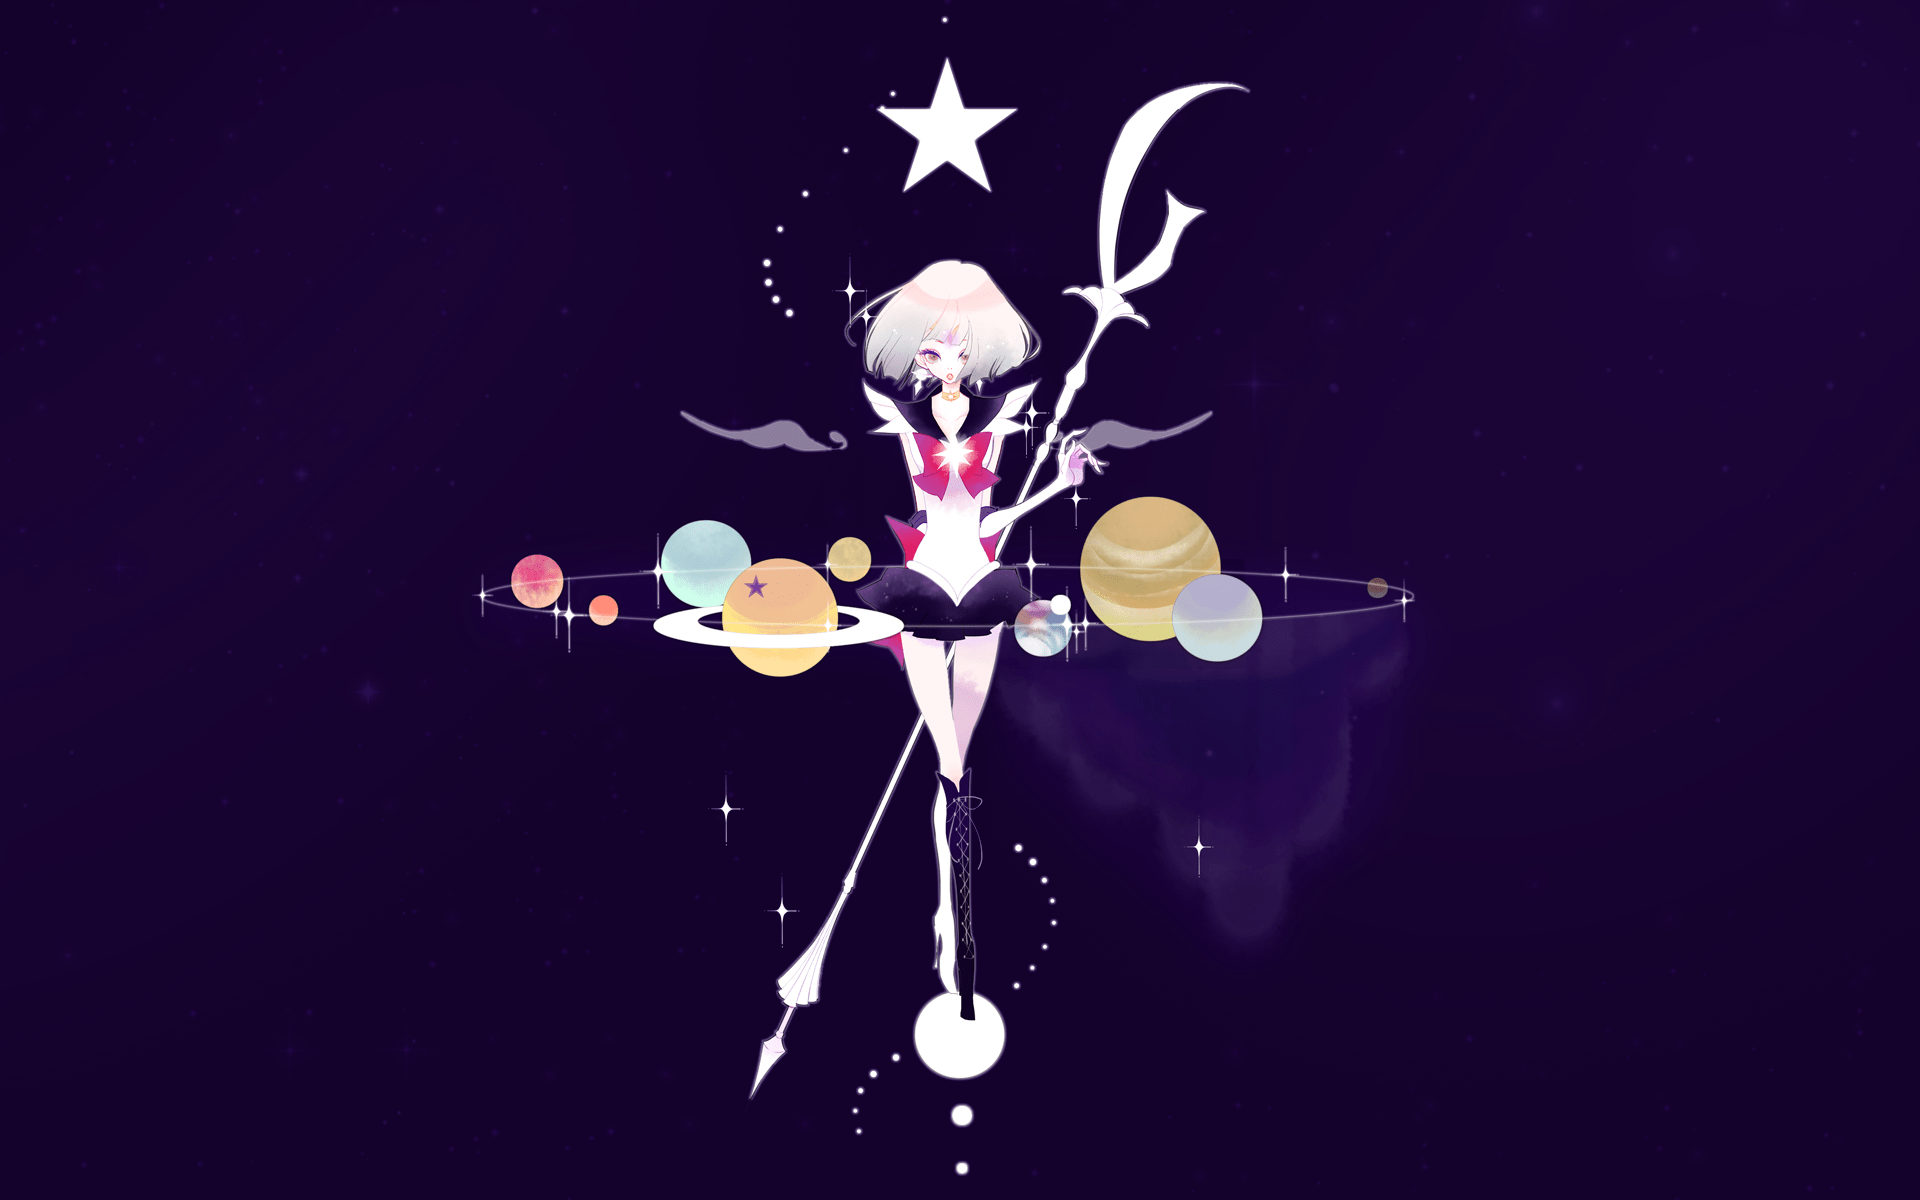 A cartoon of an angel with stars and planets - Sailor Moon